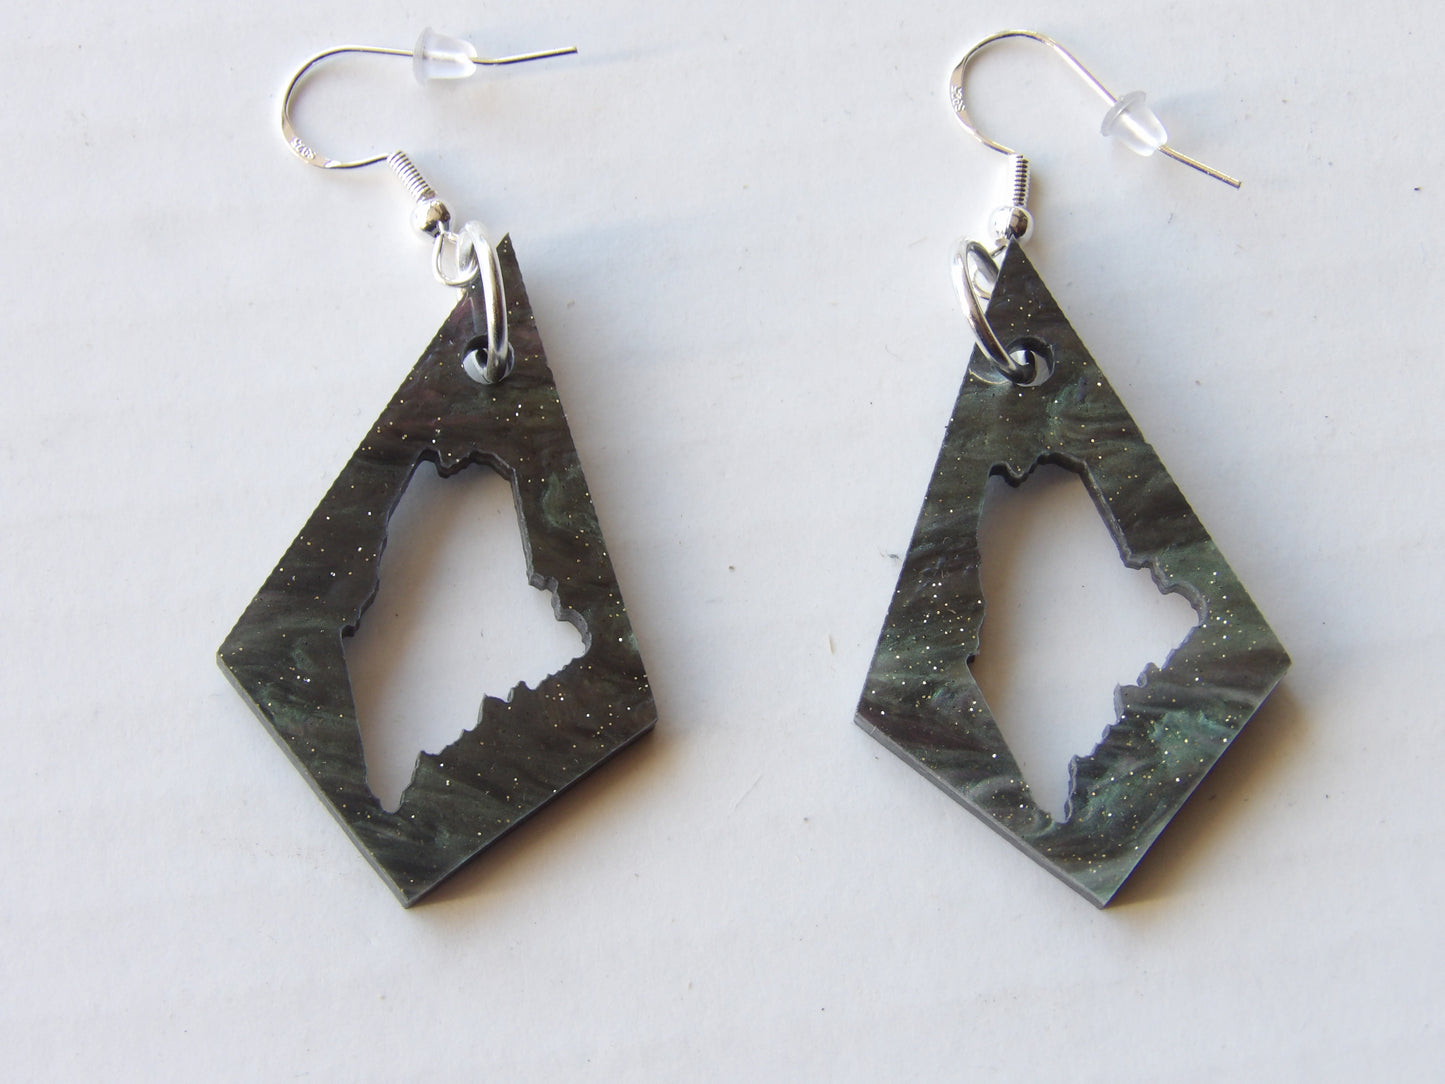 State of Maine Pyramid Dangle Acrylic Earrings (8 Colors)